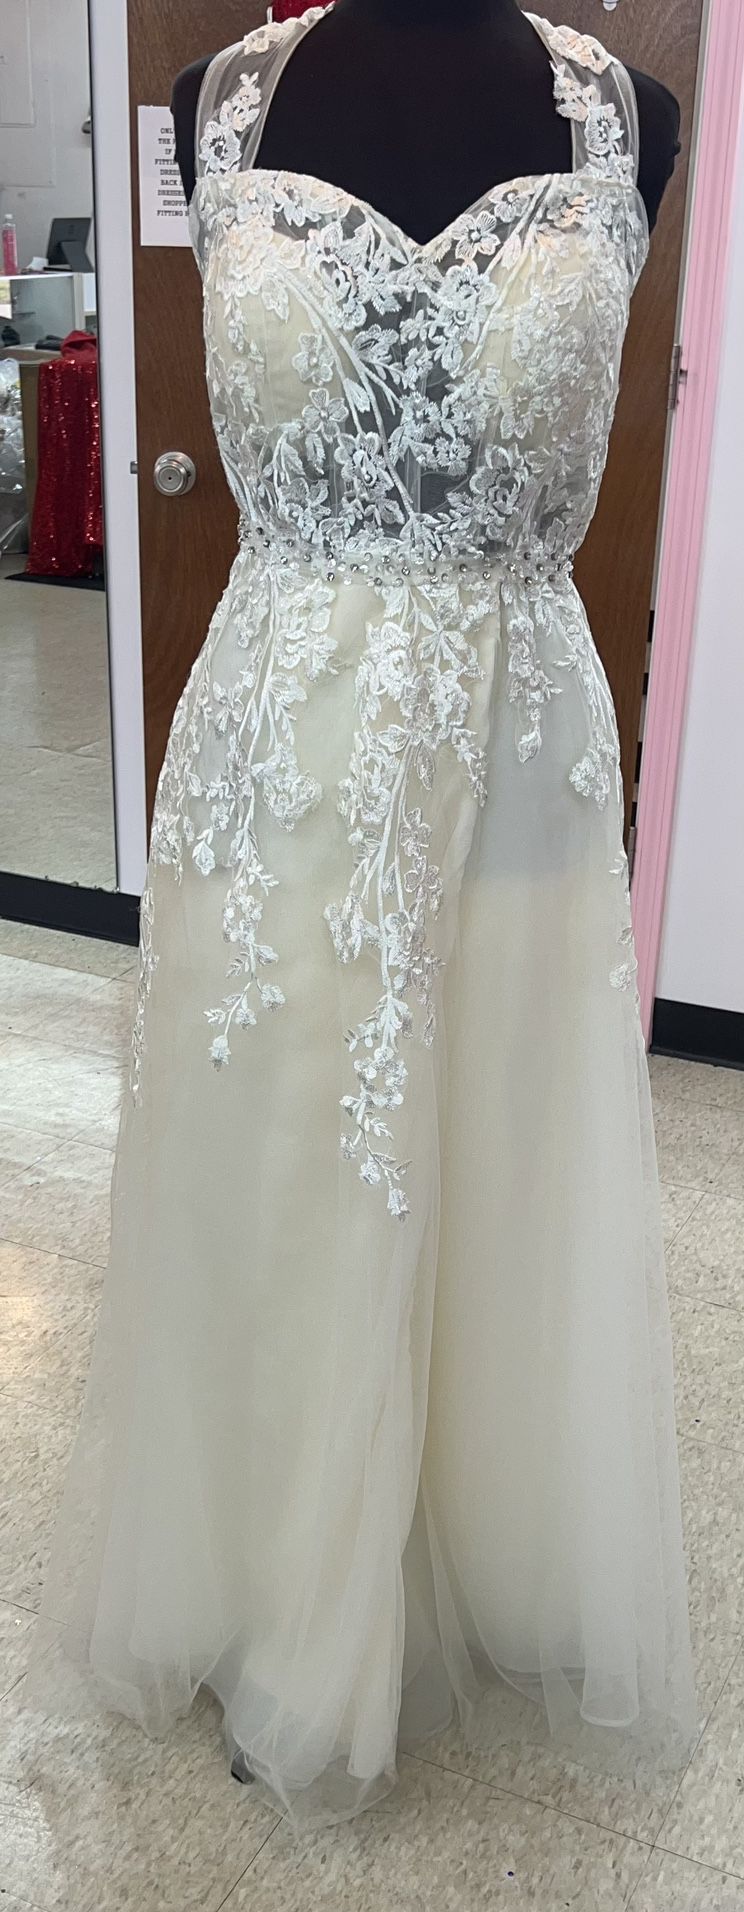 New With Tags Size 14 Wedding Dress $151